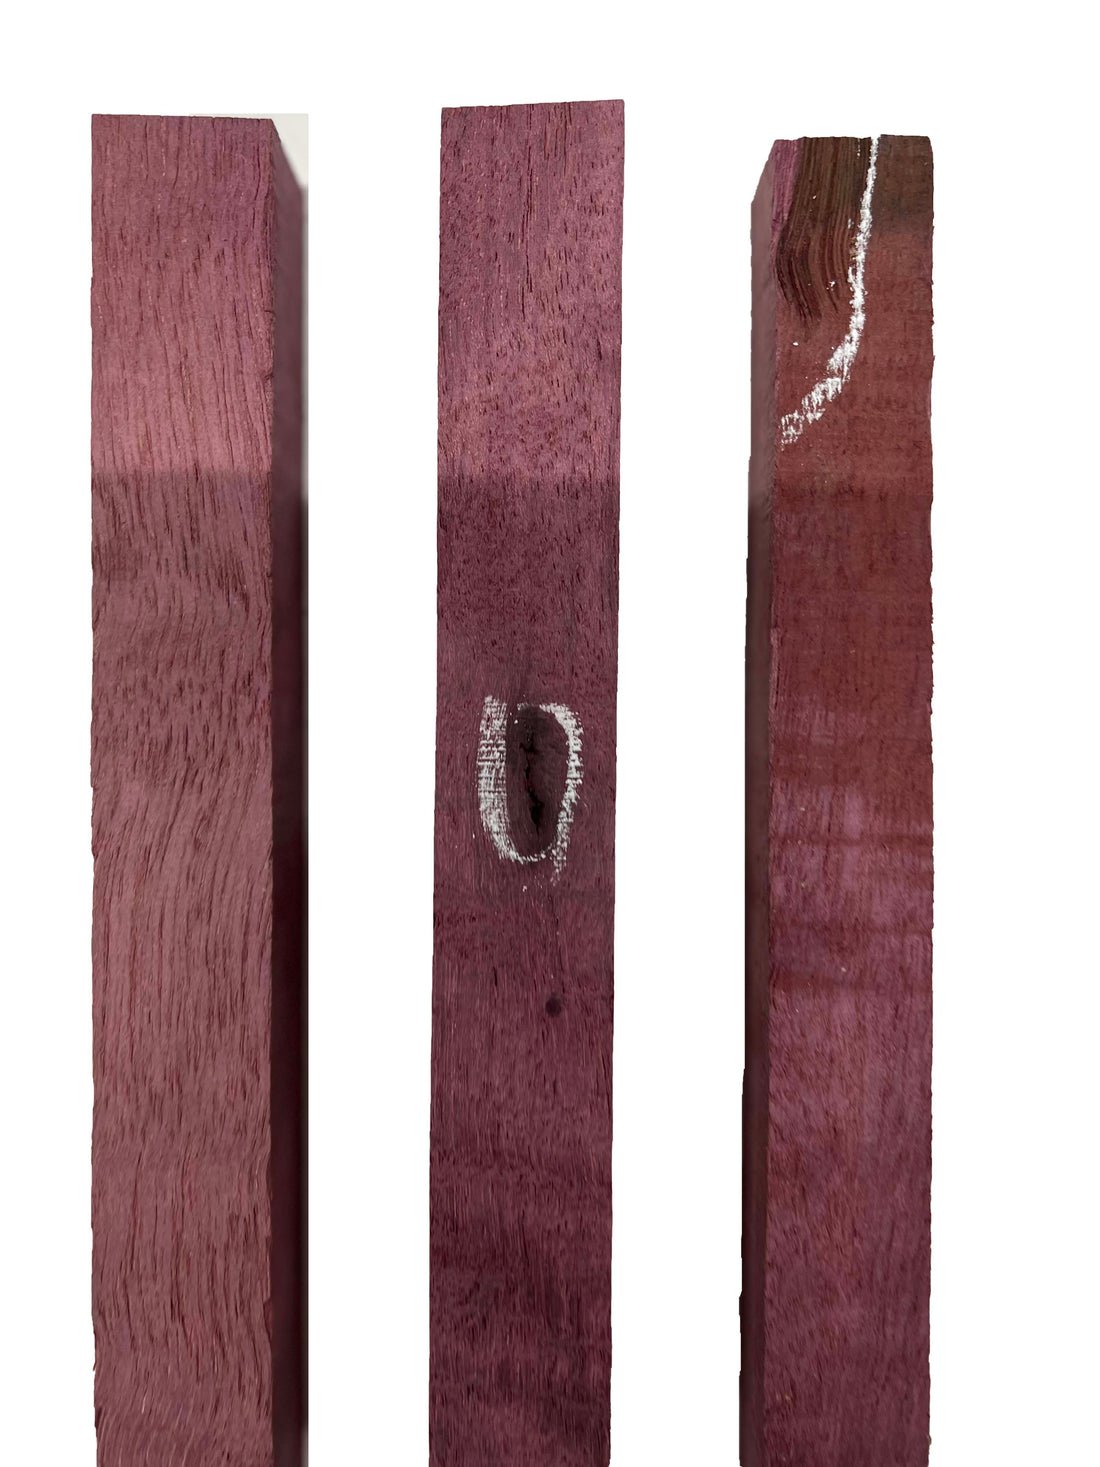 Pack of 3, Purpleheart Turning Wood Blank 12&quot; x 1&quot; x 1&quot; 